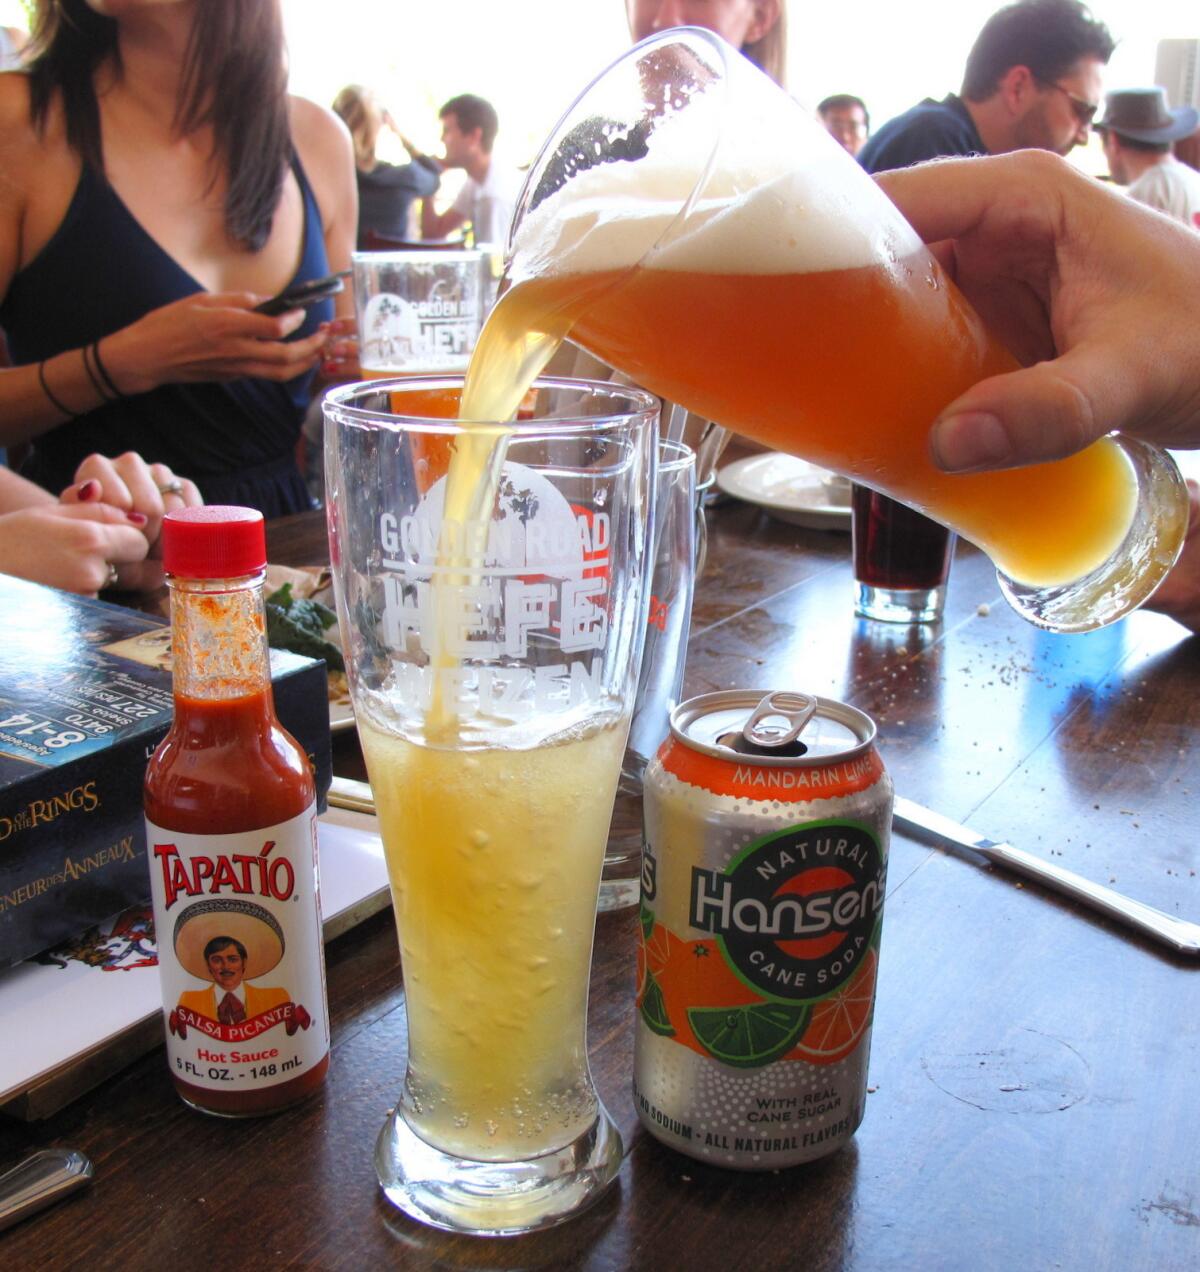 Experiment with making your own shandy, combining beer with ingredients such as citrus soda.